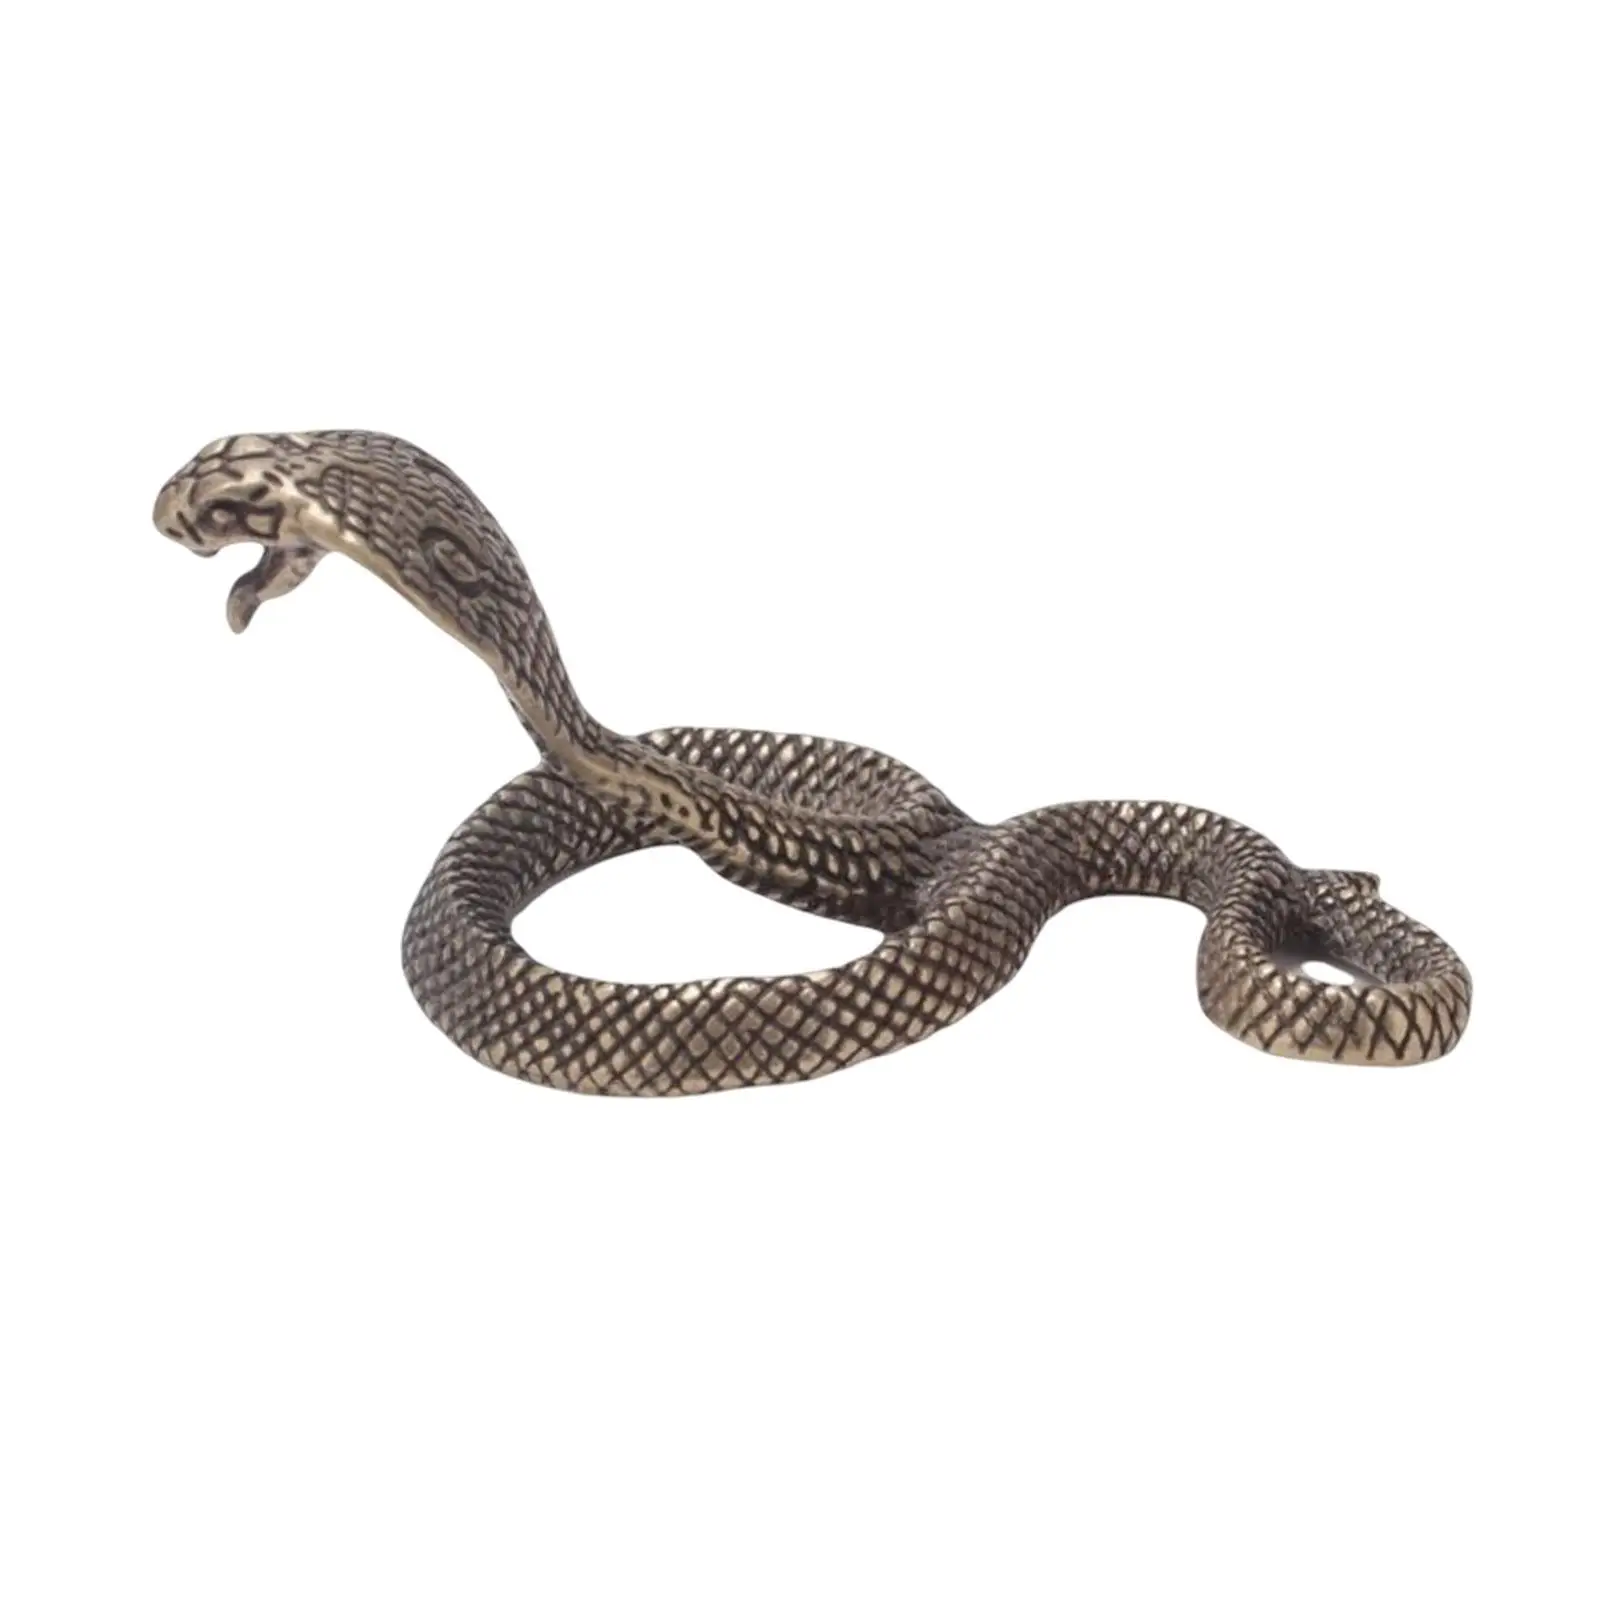 Realistic Snake Statue Animal Craft Brass Collectibles Ornaments Figurine for Halloween Home Decoration Office Bedroom Wedding